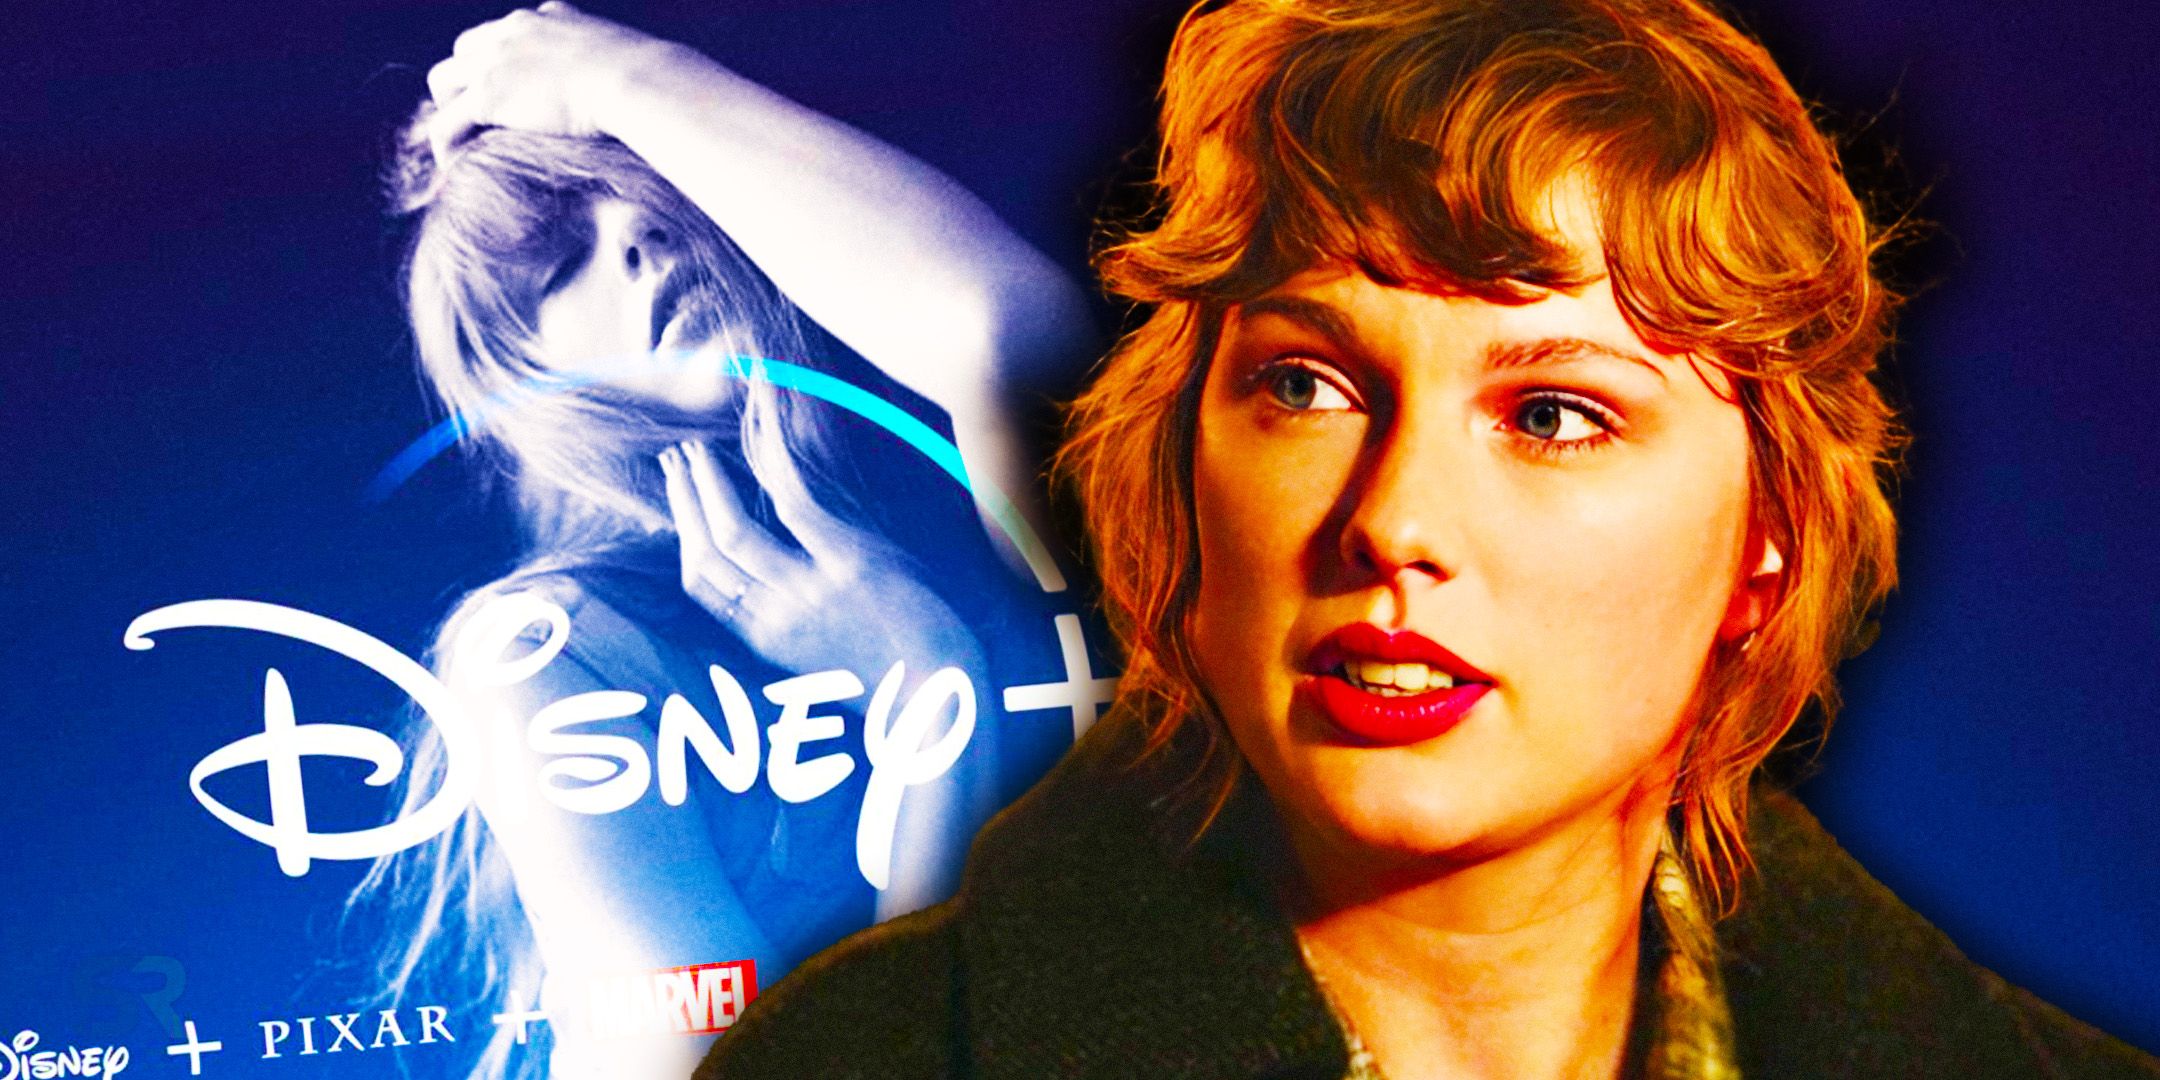 Taylor Swift in Folklore: The Long Pond Studio Sessions and the cover of The Anthology version of The Tortured Poets Department behind a Disney+ logo.